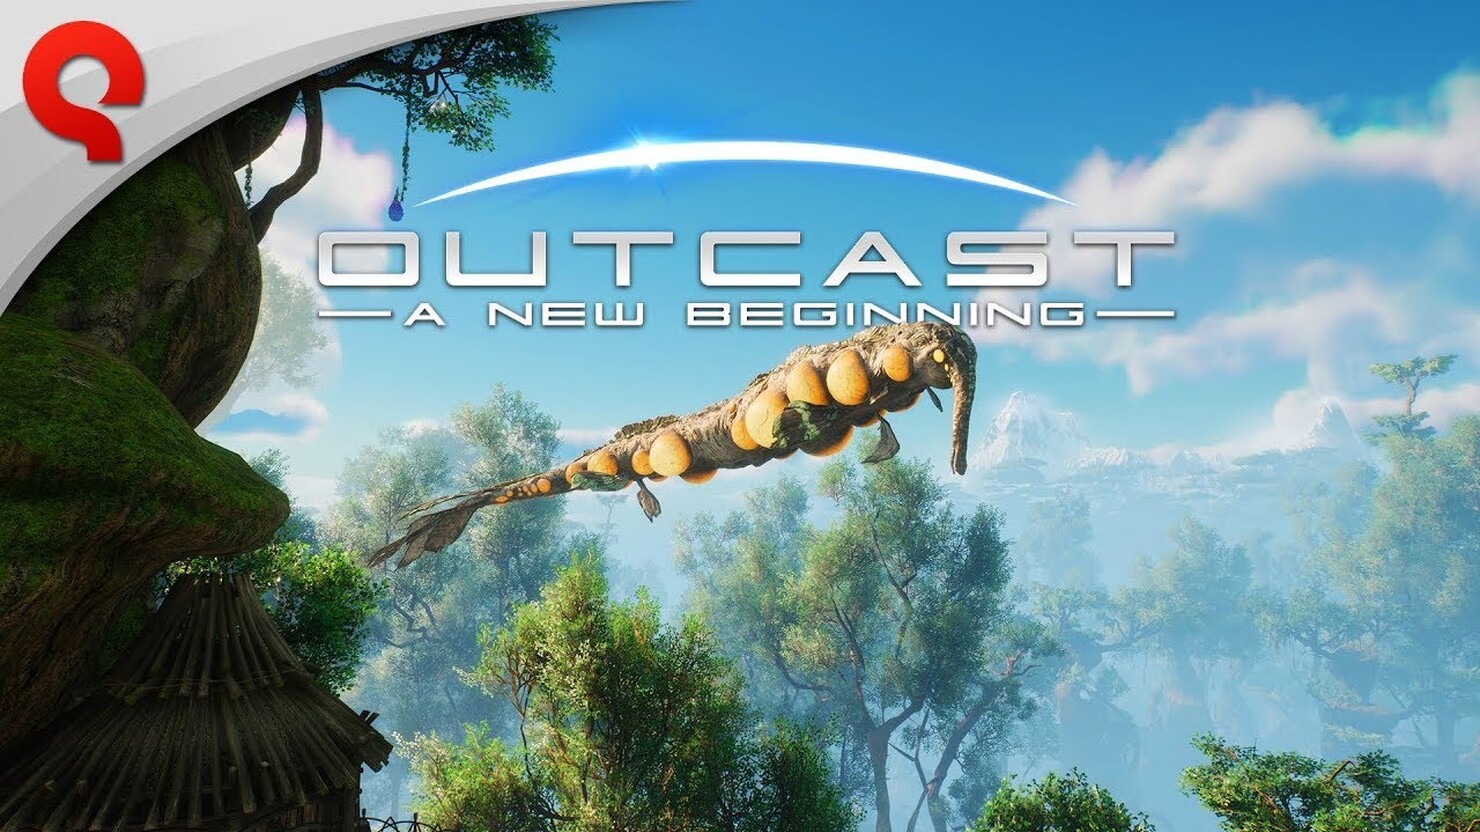 Outcast a new beginning xbox. Outcast - a New beginning. Outcast - a New beginning игра. Outcast 2 a New beginning. Outcast a New beginning вооружение.